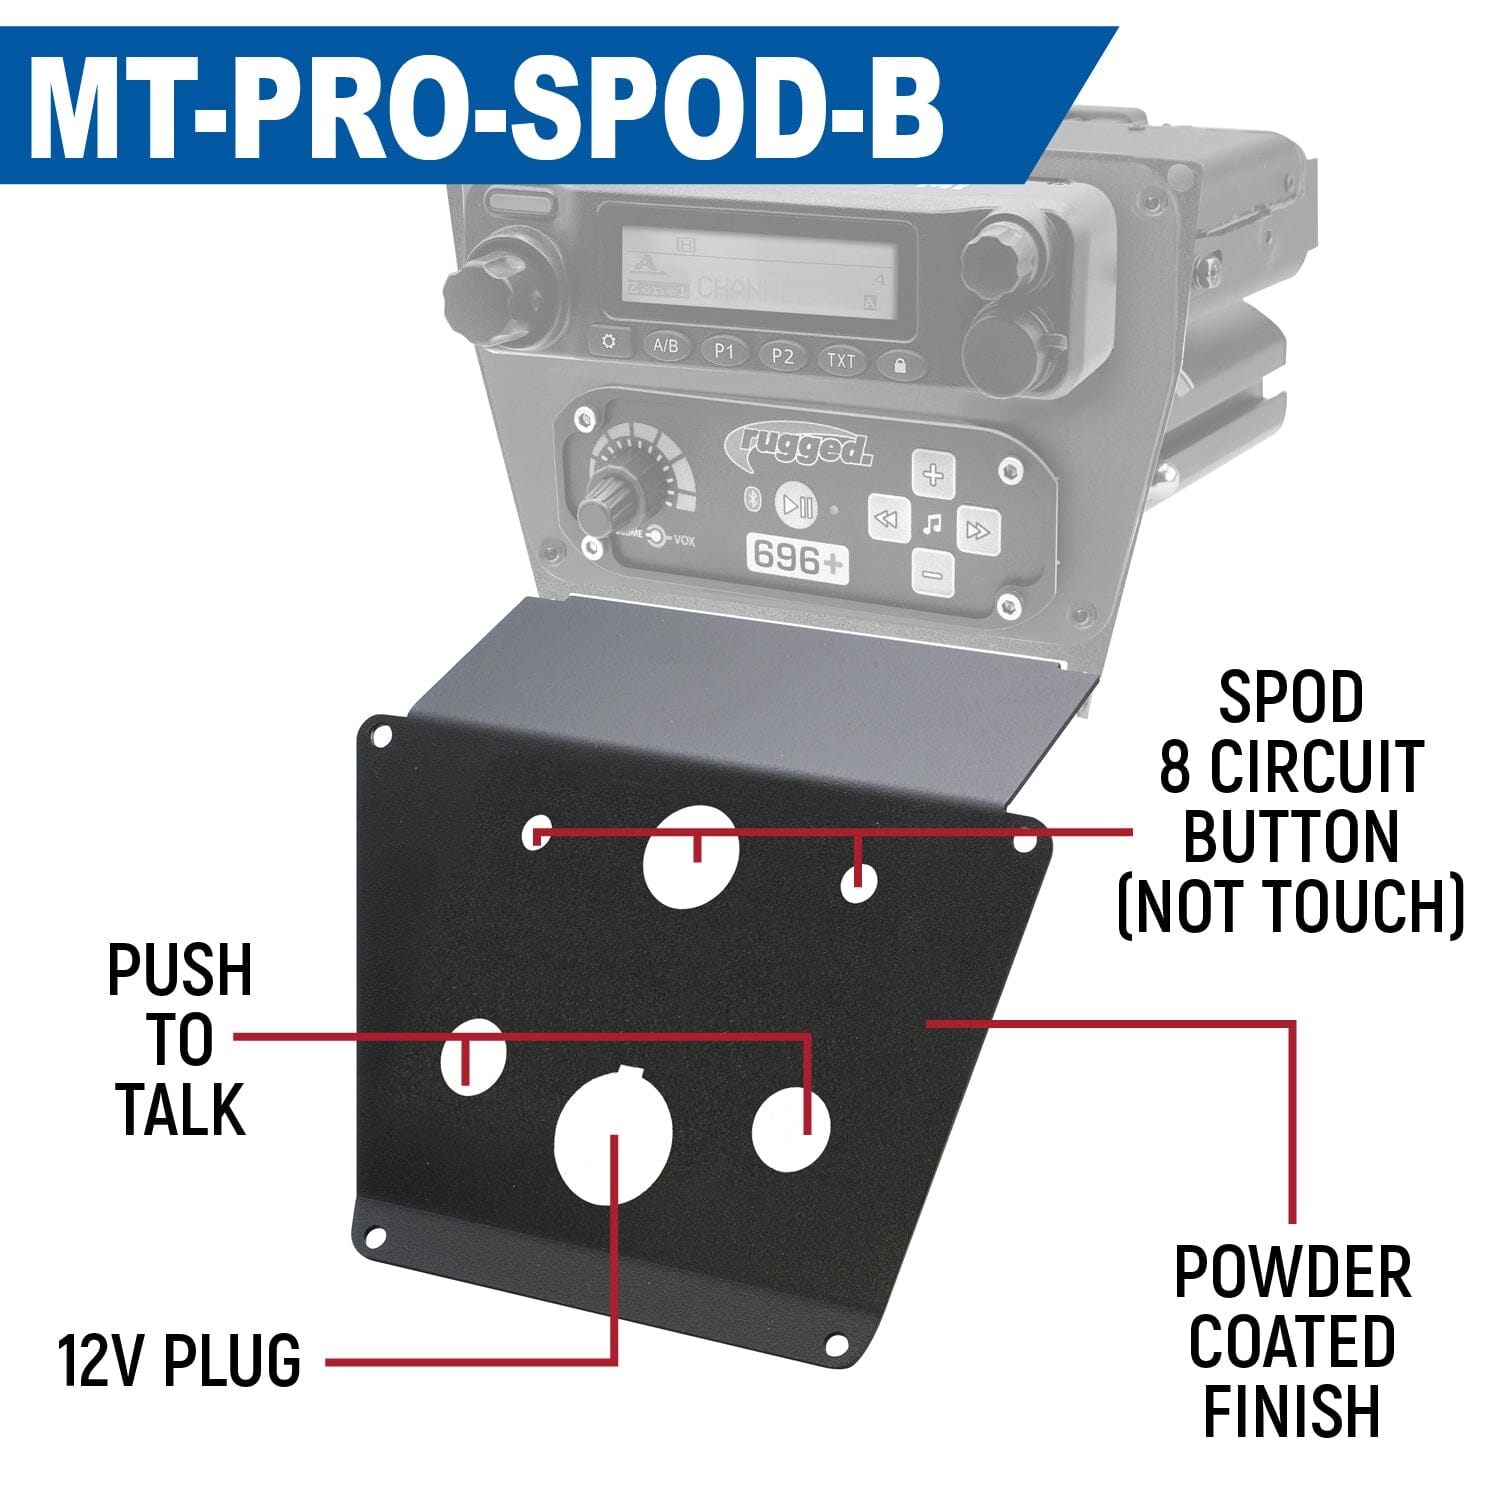 Lower Accessory Panel for Polaris Polaris RZR PRO XP, RZR Turbo R, and RZR PRO R with 2 push-to-talk holes, 12V outlet hole, and  SPod 8 Circuit Button panel hole